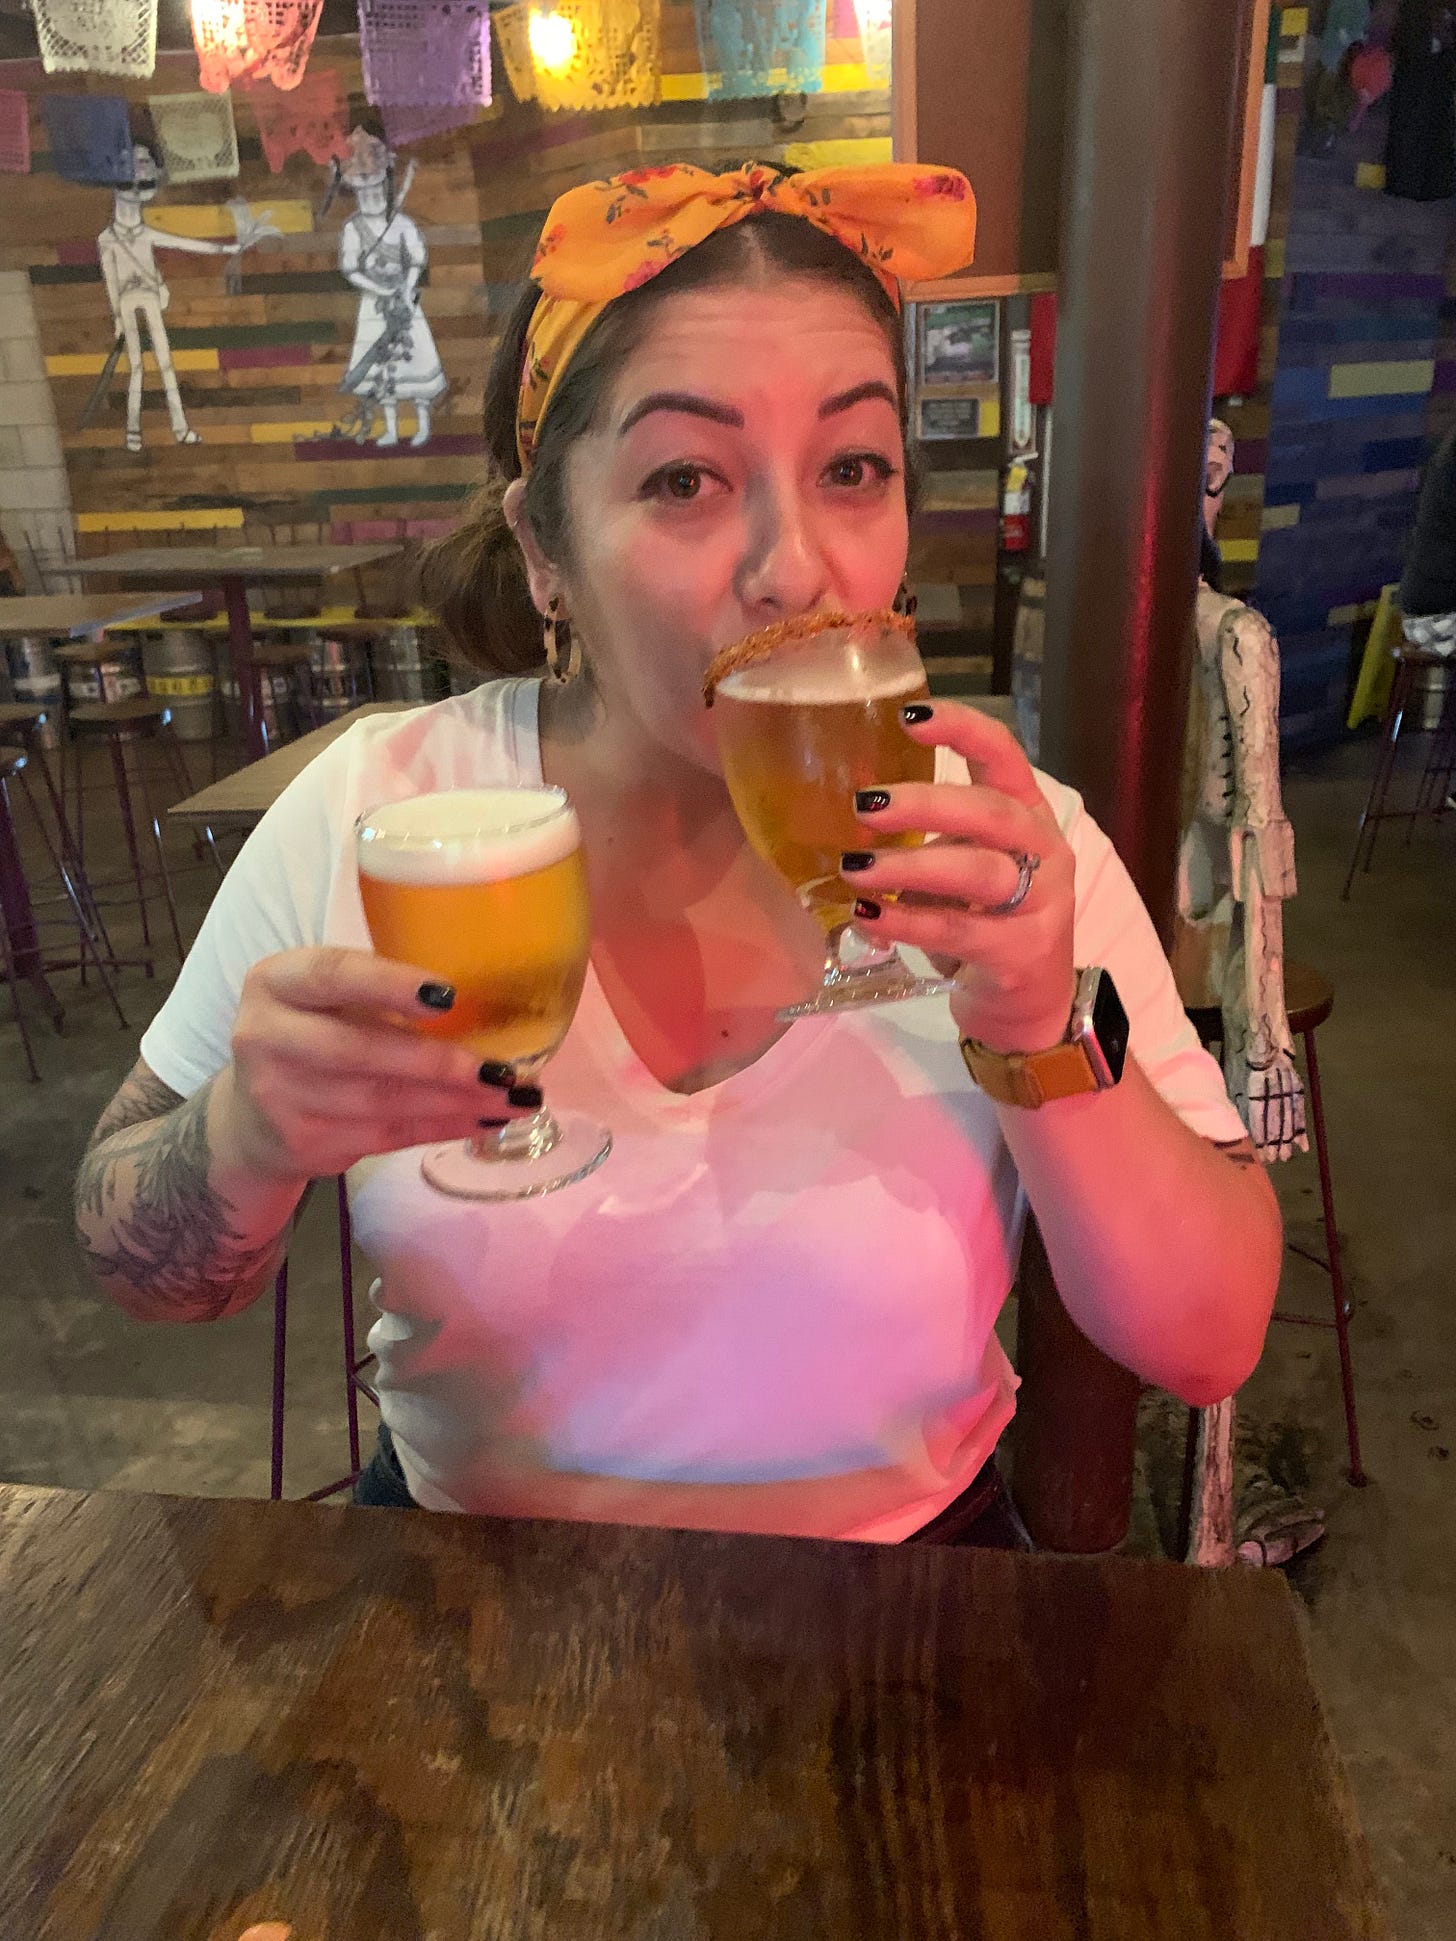 Chicana woman wearing an orange headband and holding a beer in each hand, taking a sip from each one.